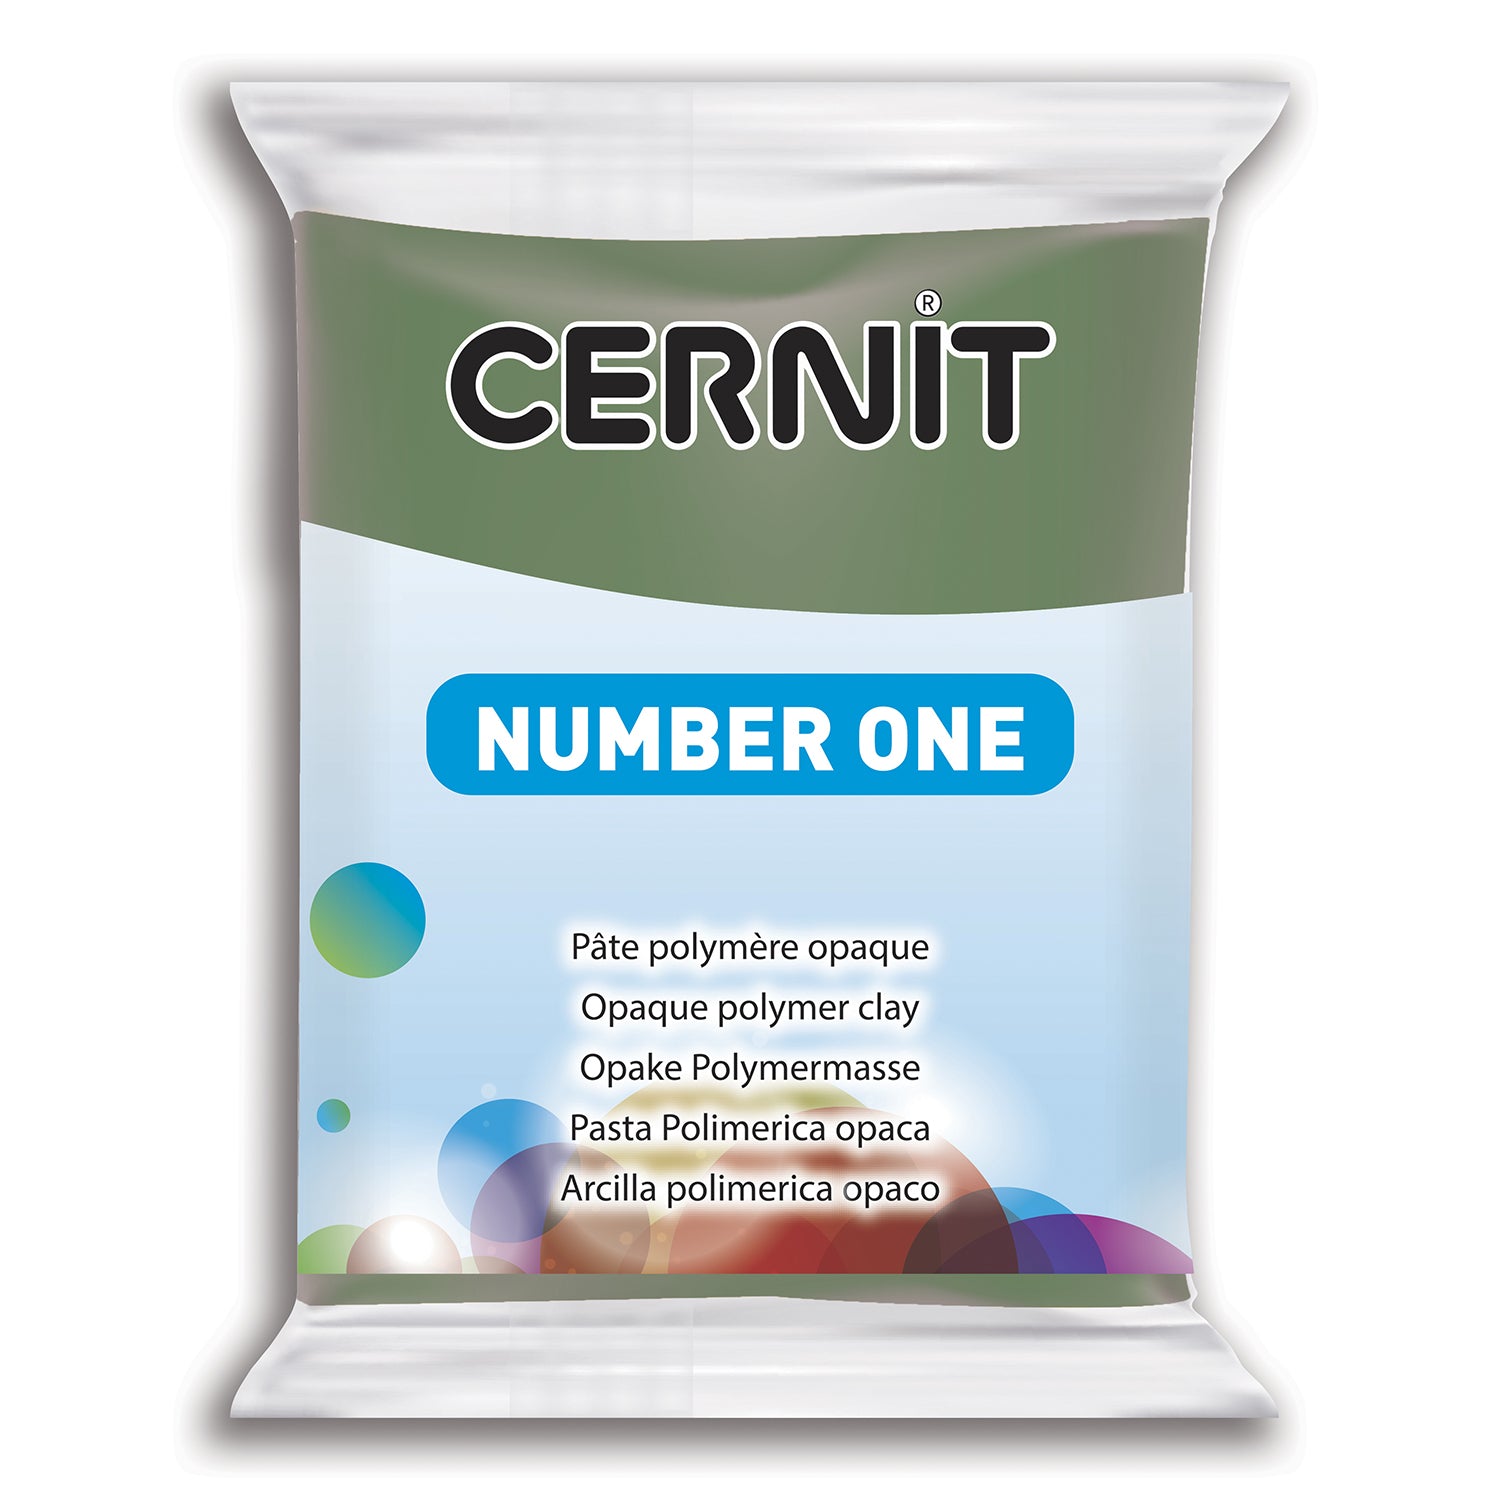 CERNIT Polymer Clay 56g Number One 645 Olive-Green